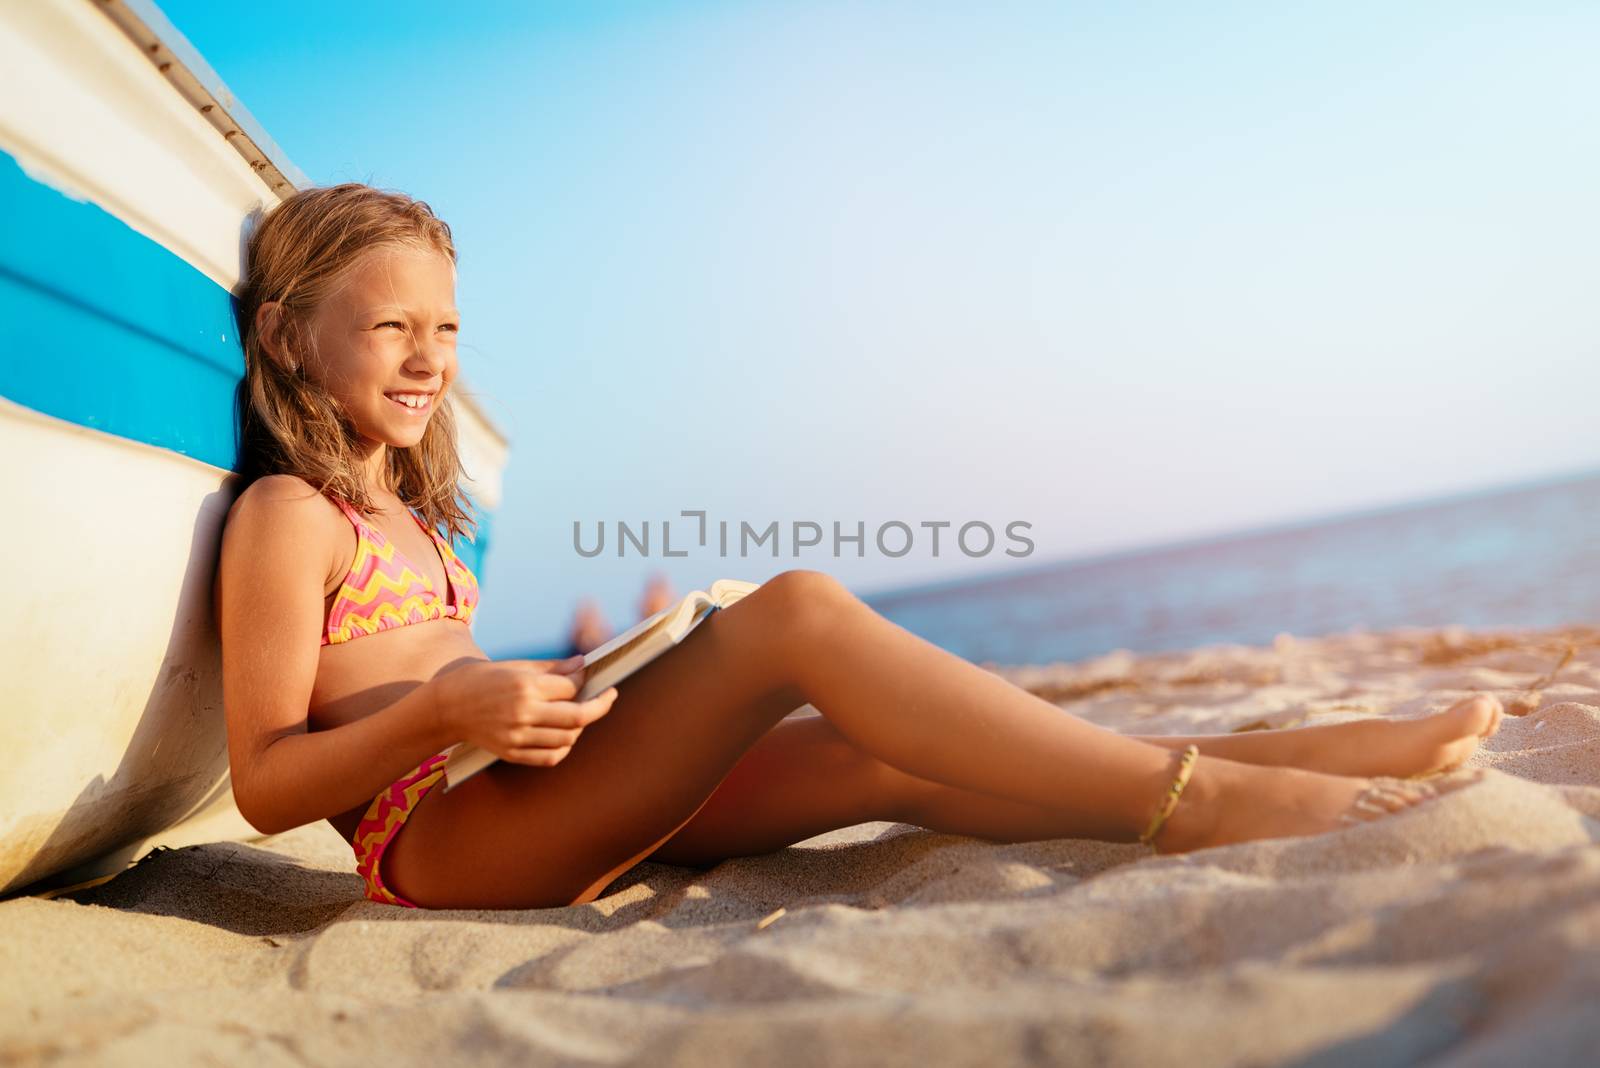 Beautiful little girl reading a book on the sandy beach.  She is sitting next to boat and looking away with smile on her thinking face.